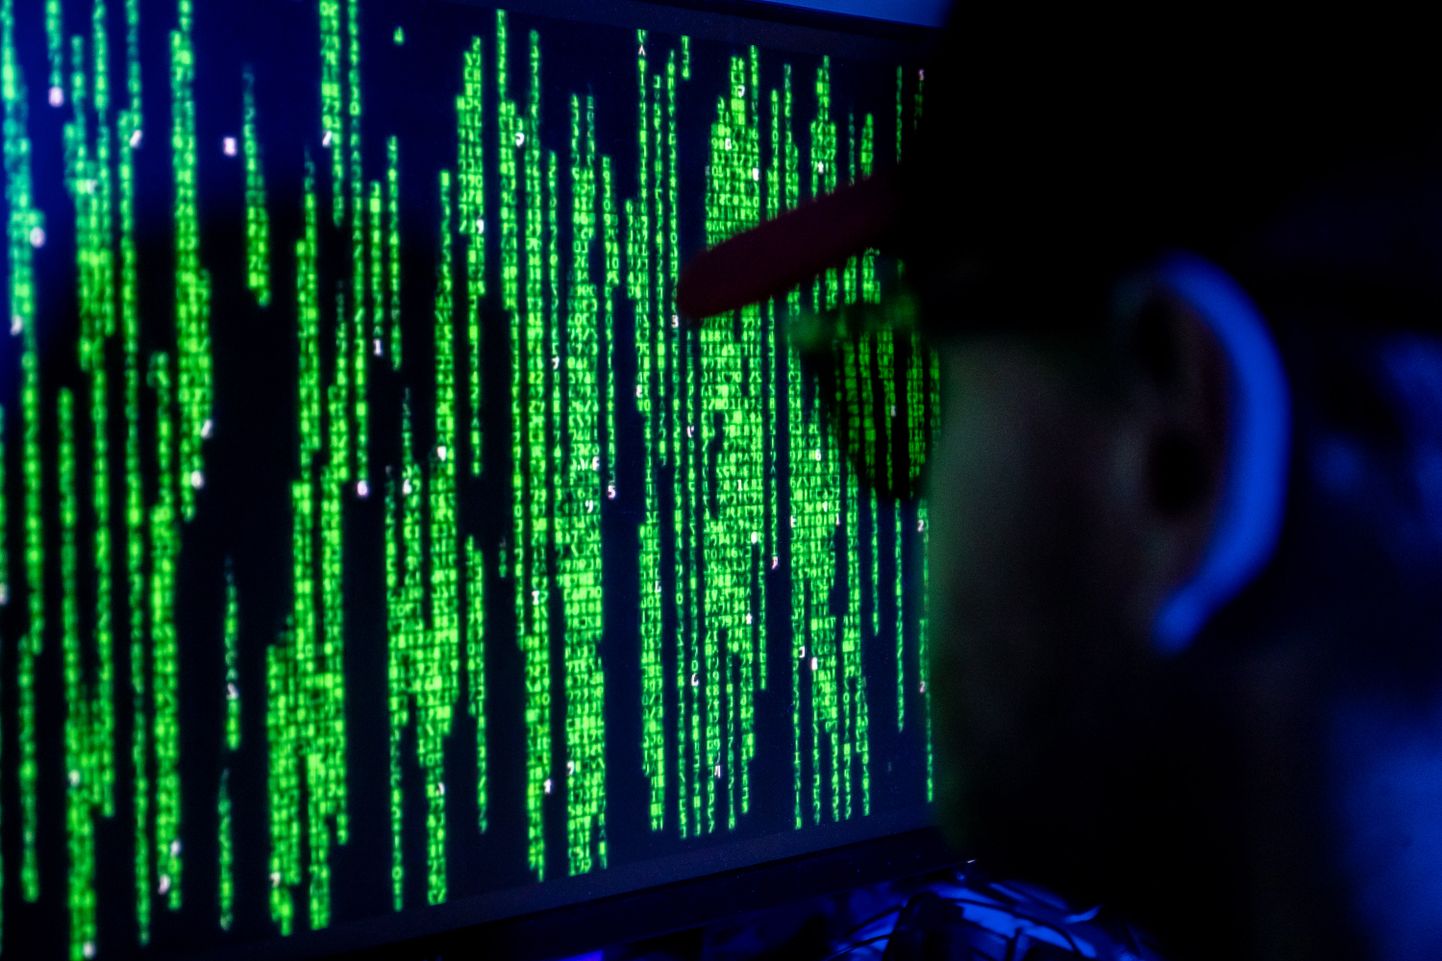 Estonia's state institutions hit by largest cyberattack to date.